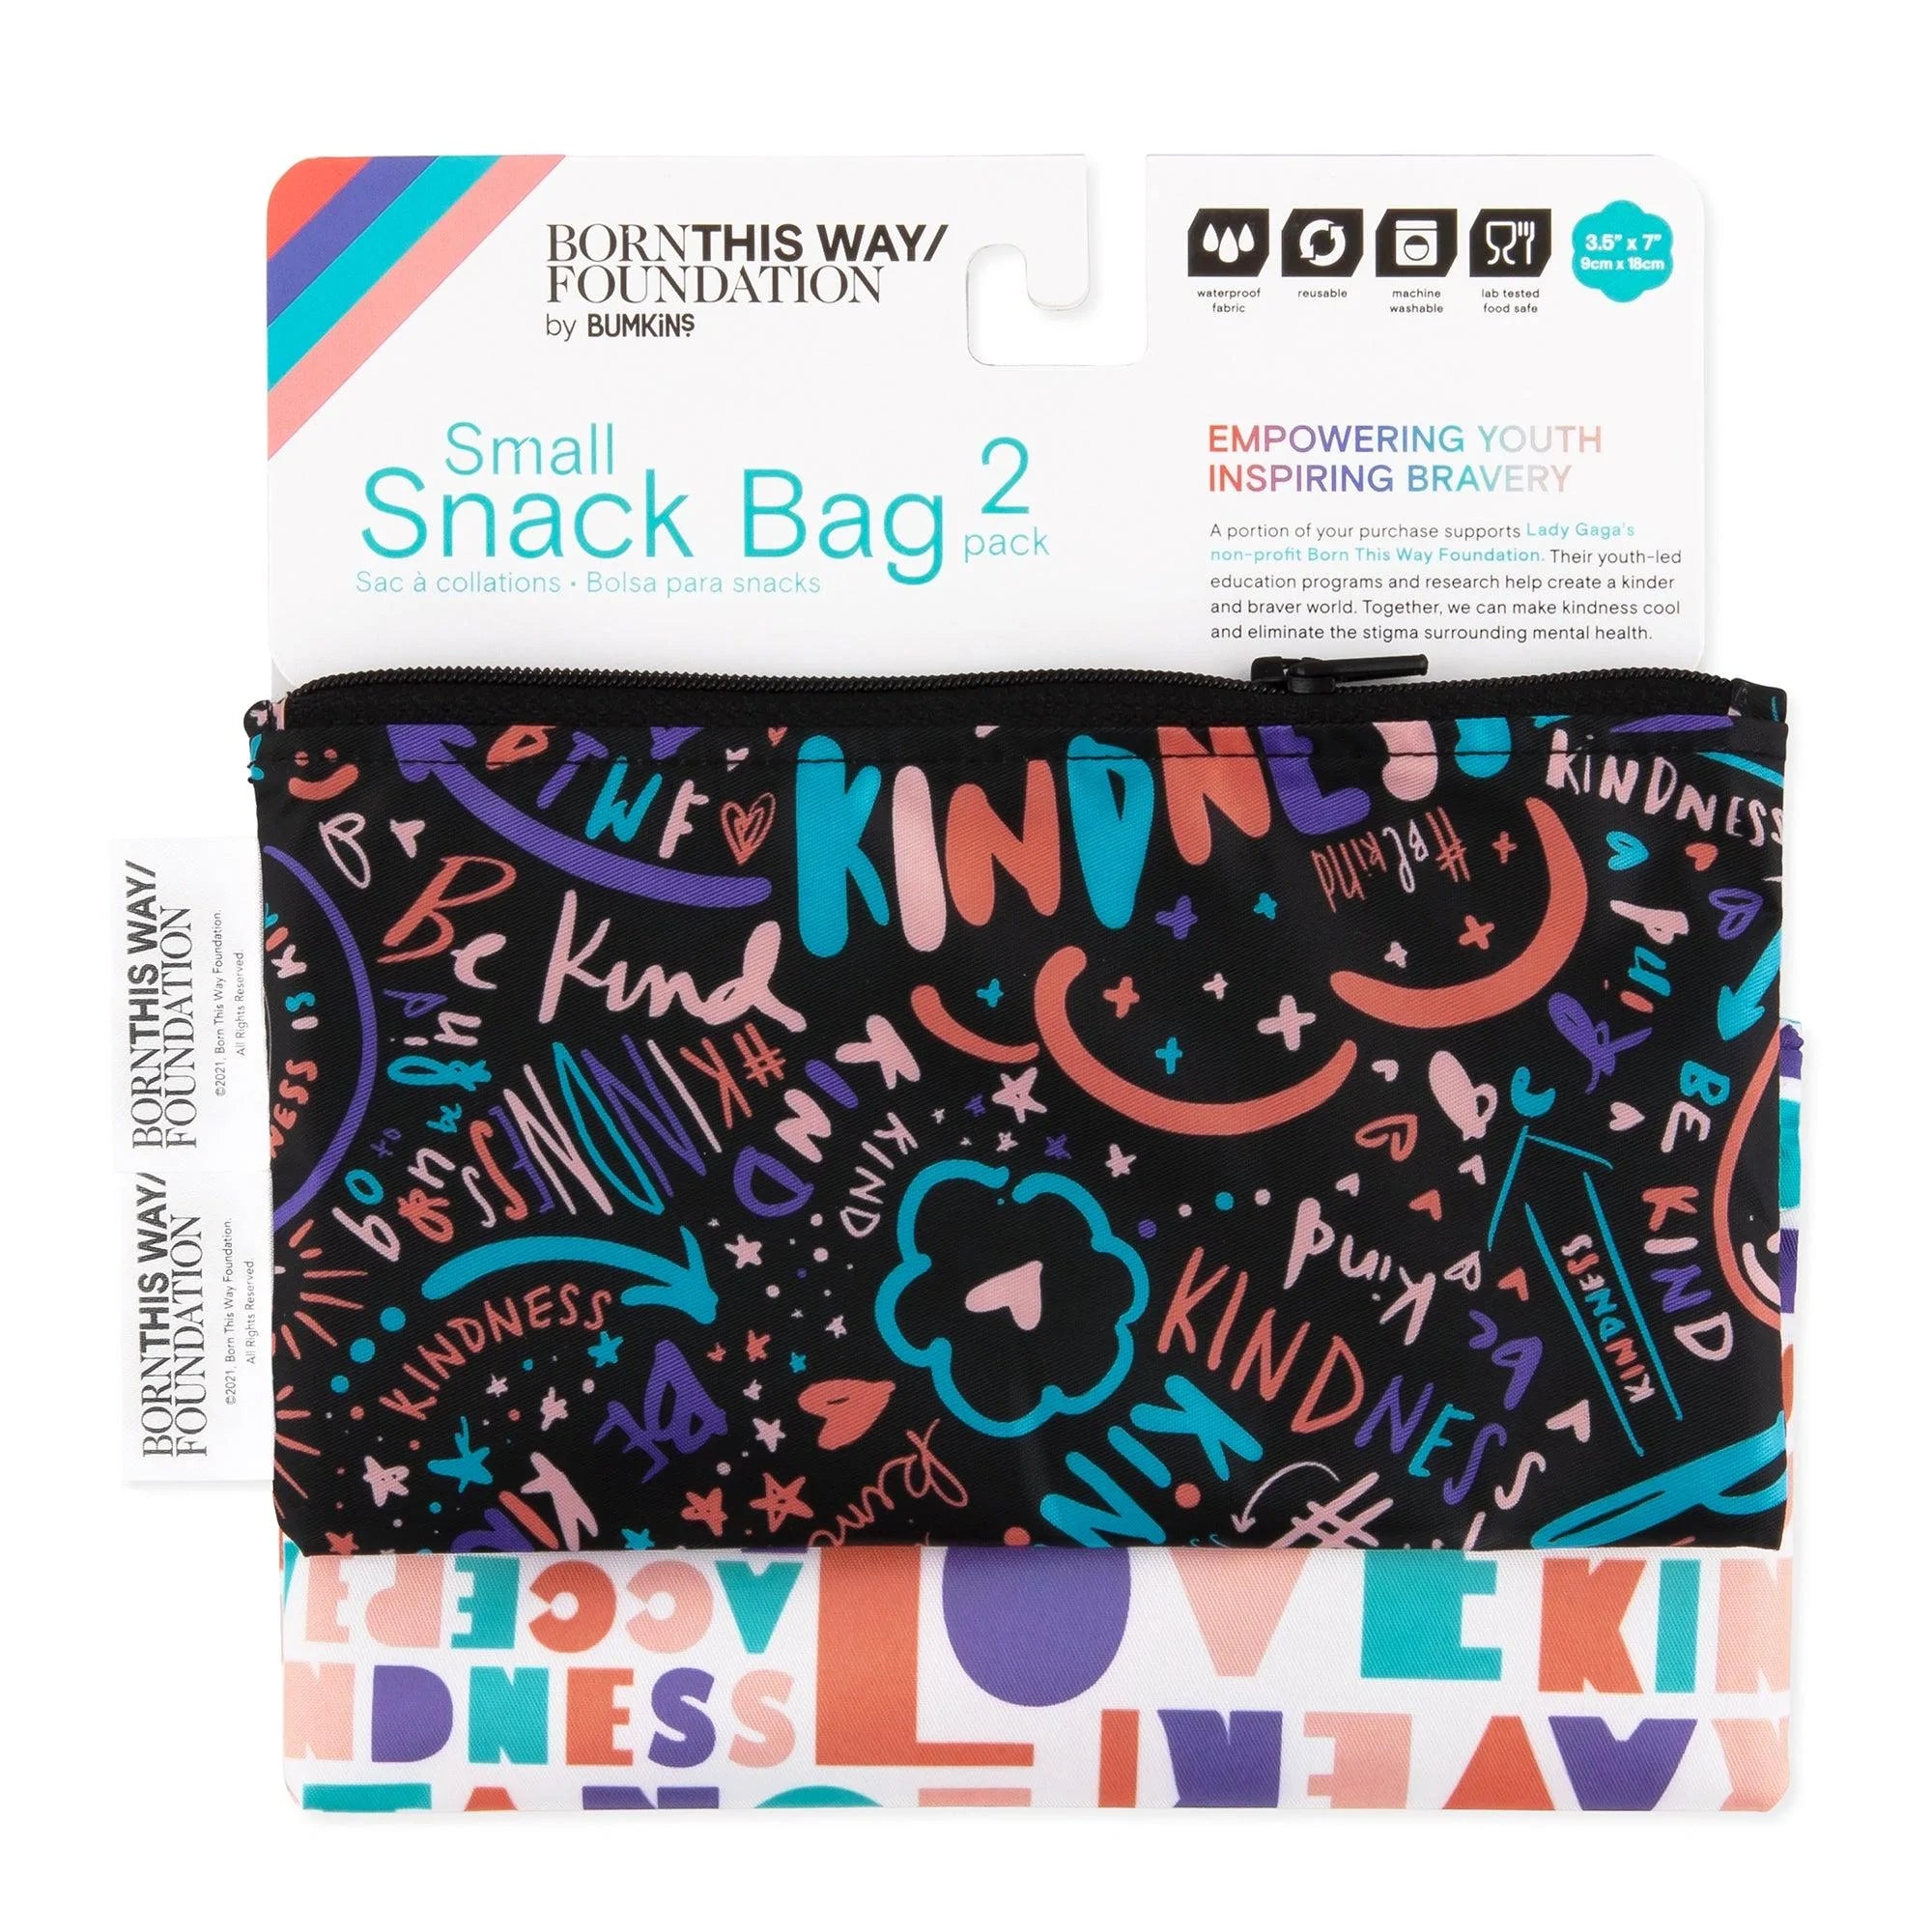 Reusable Snack Bag, Small 2-Pack: Channel Kindness & Elements of Kindness - Bumkins